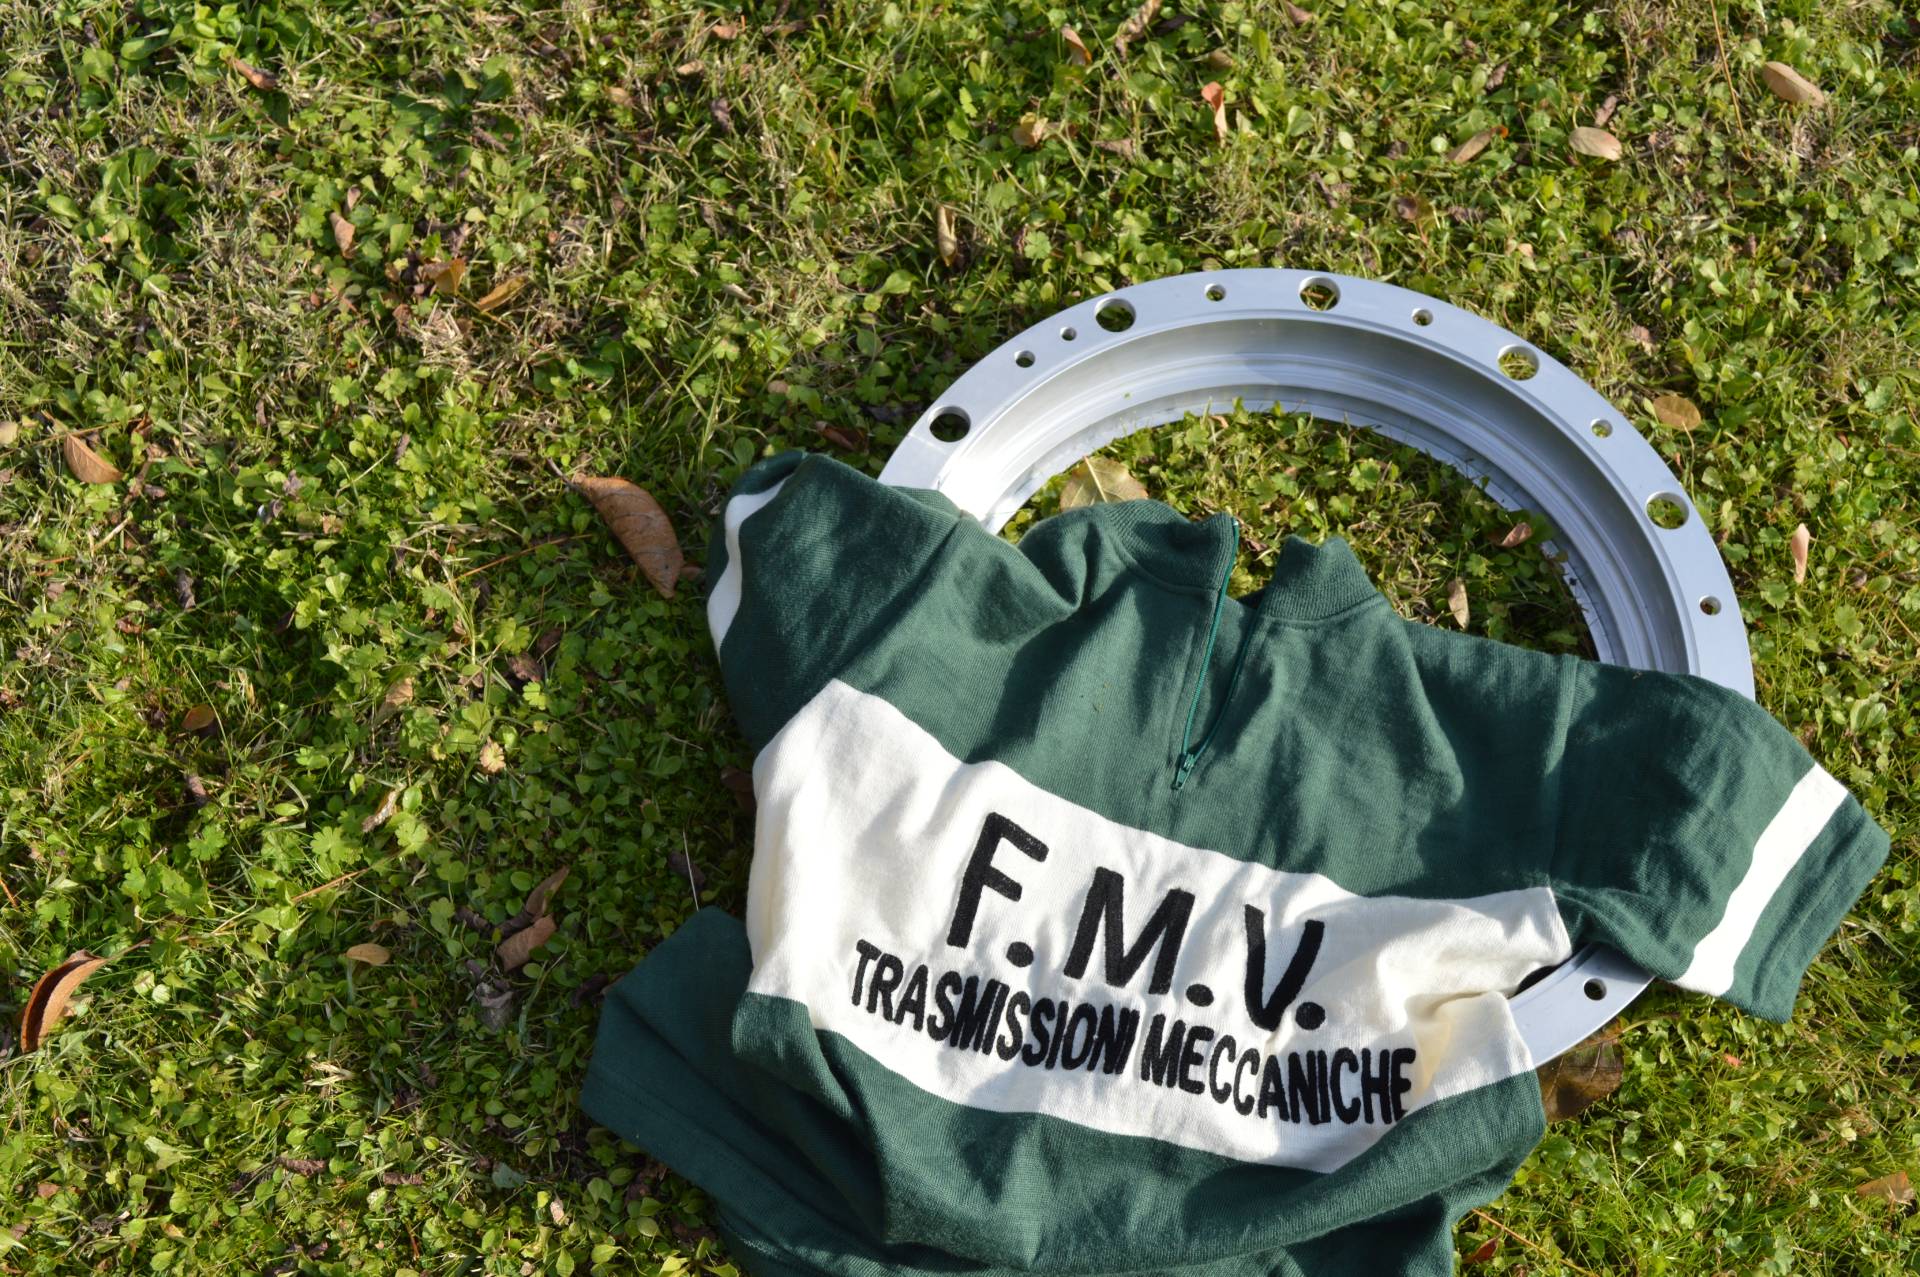 FMV pulley and shirt